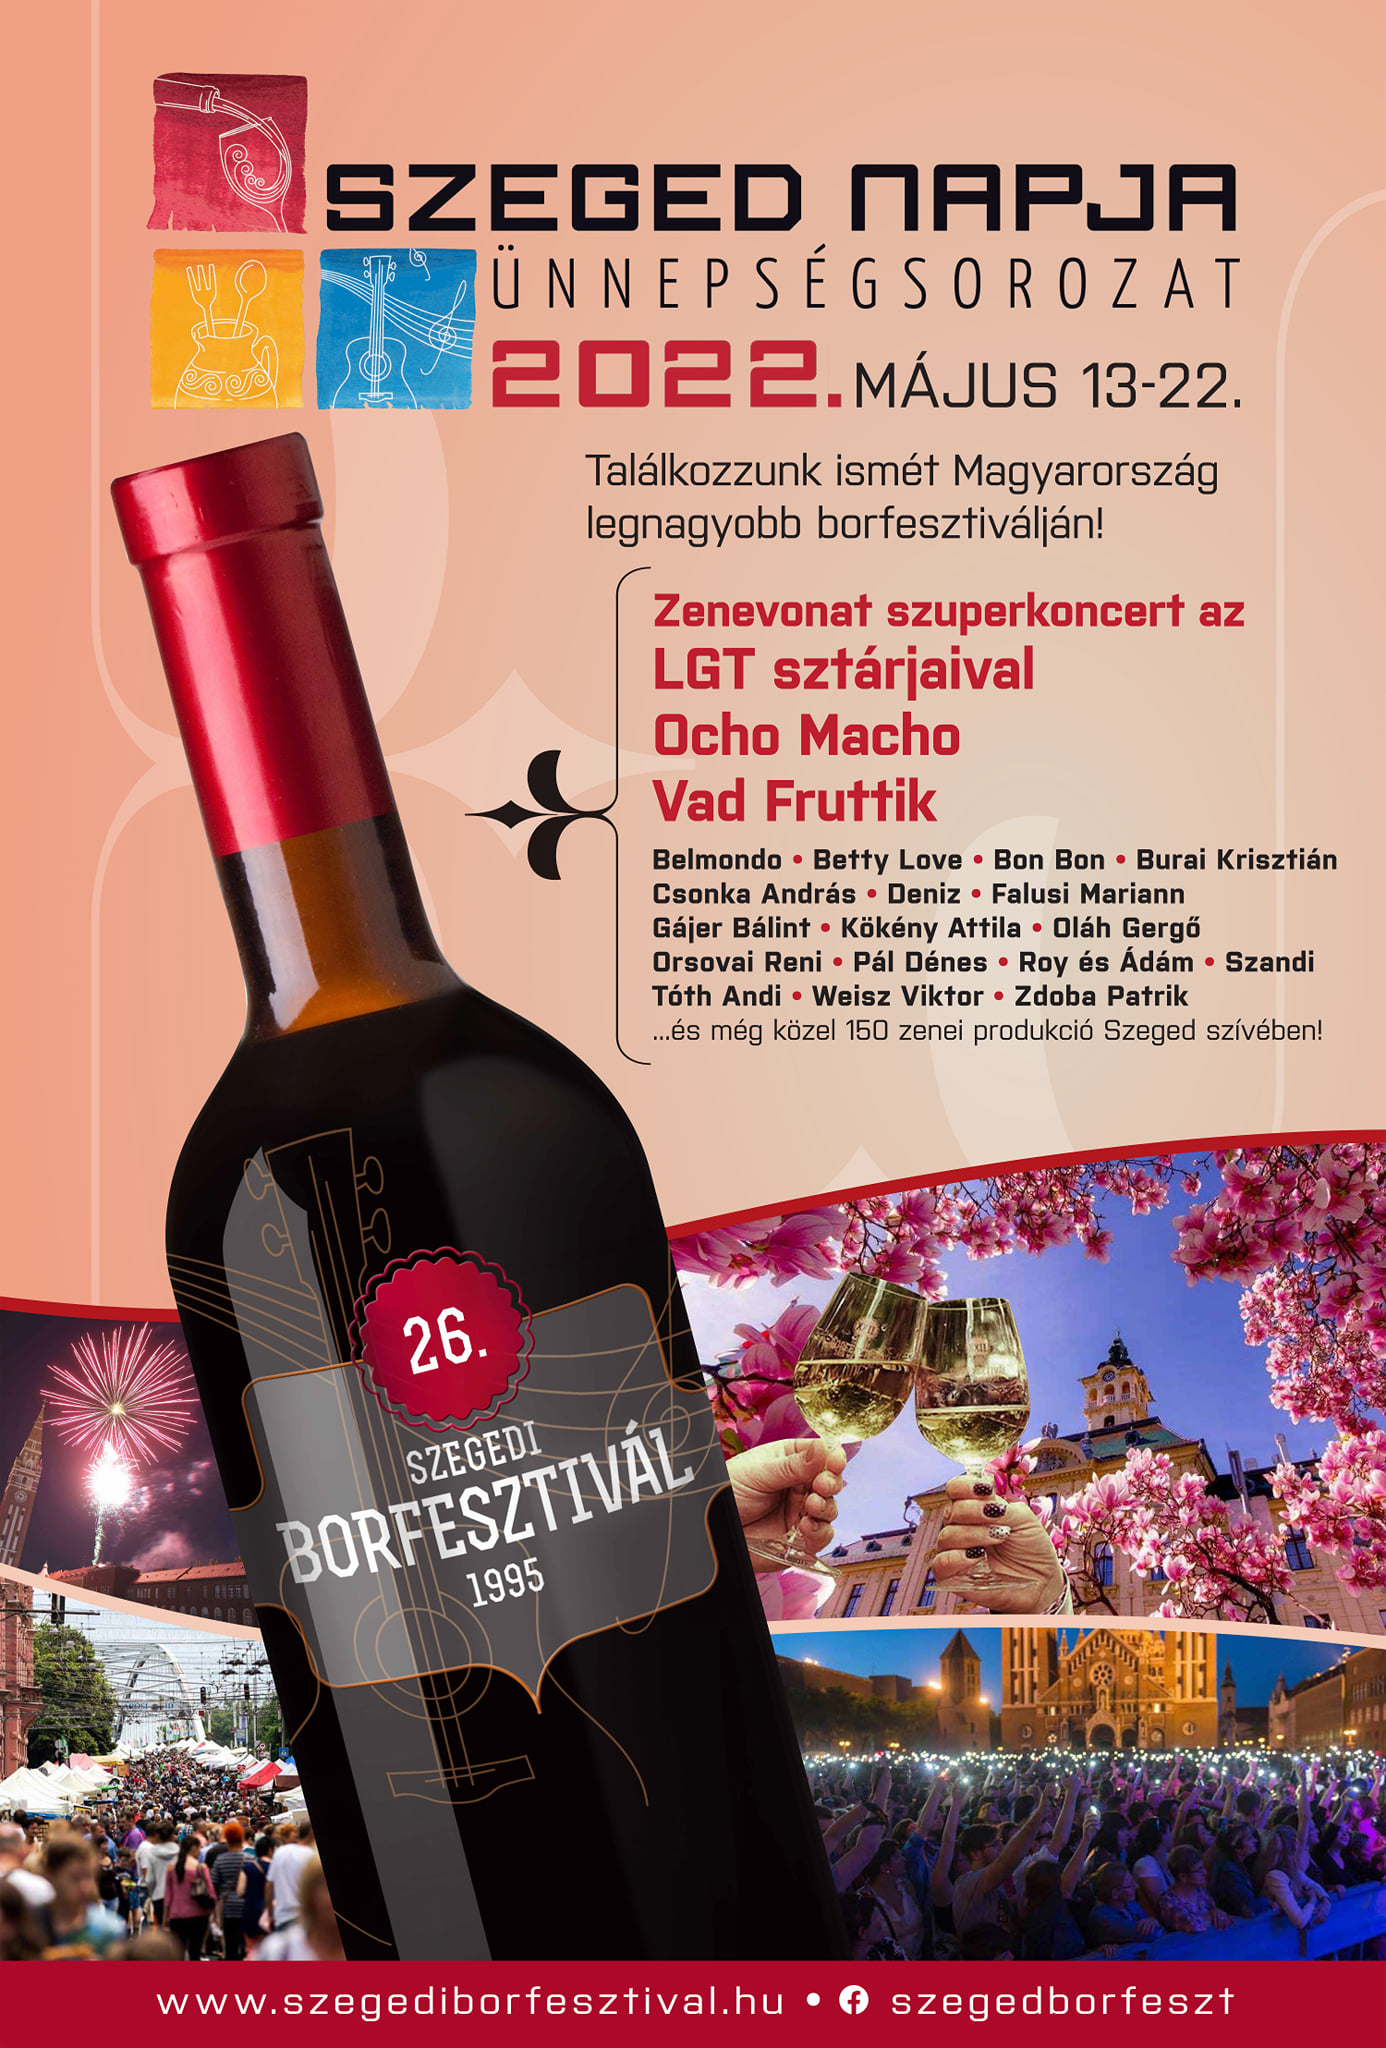 26th Wine festival at Szeged